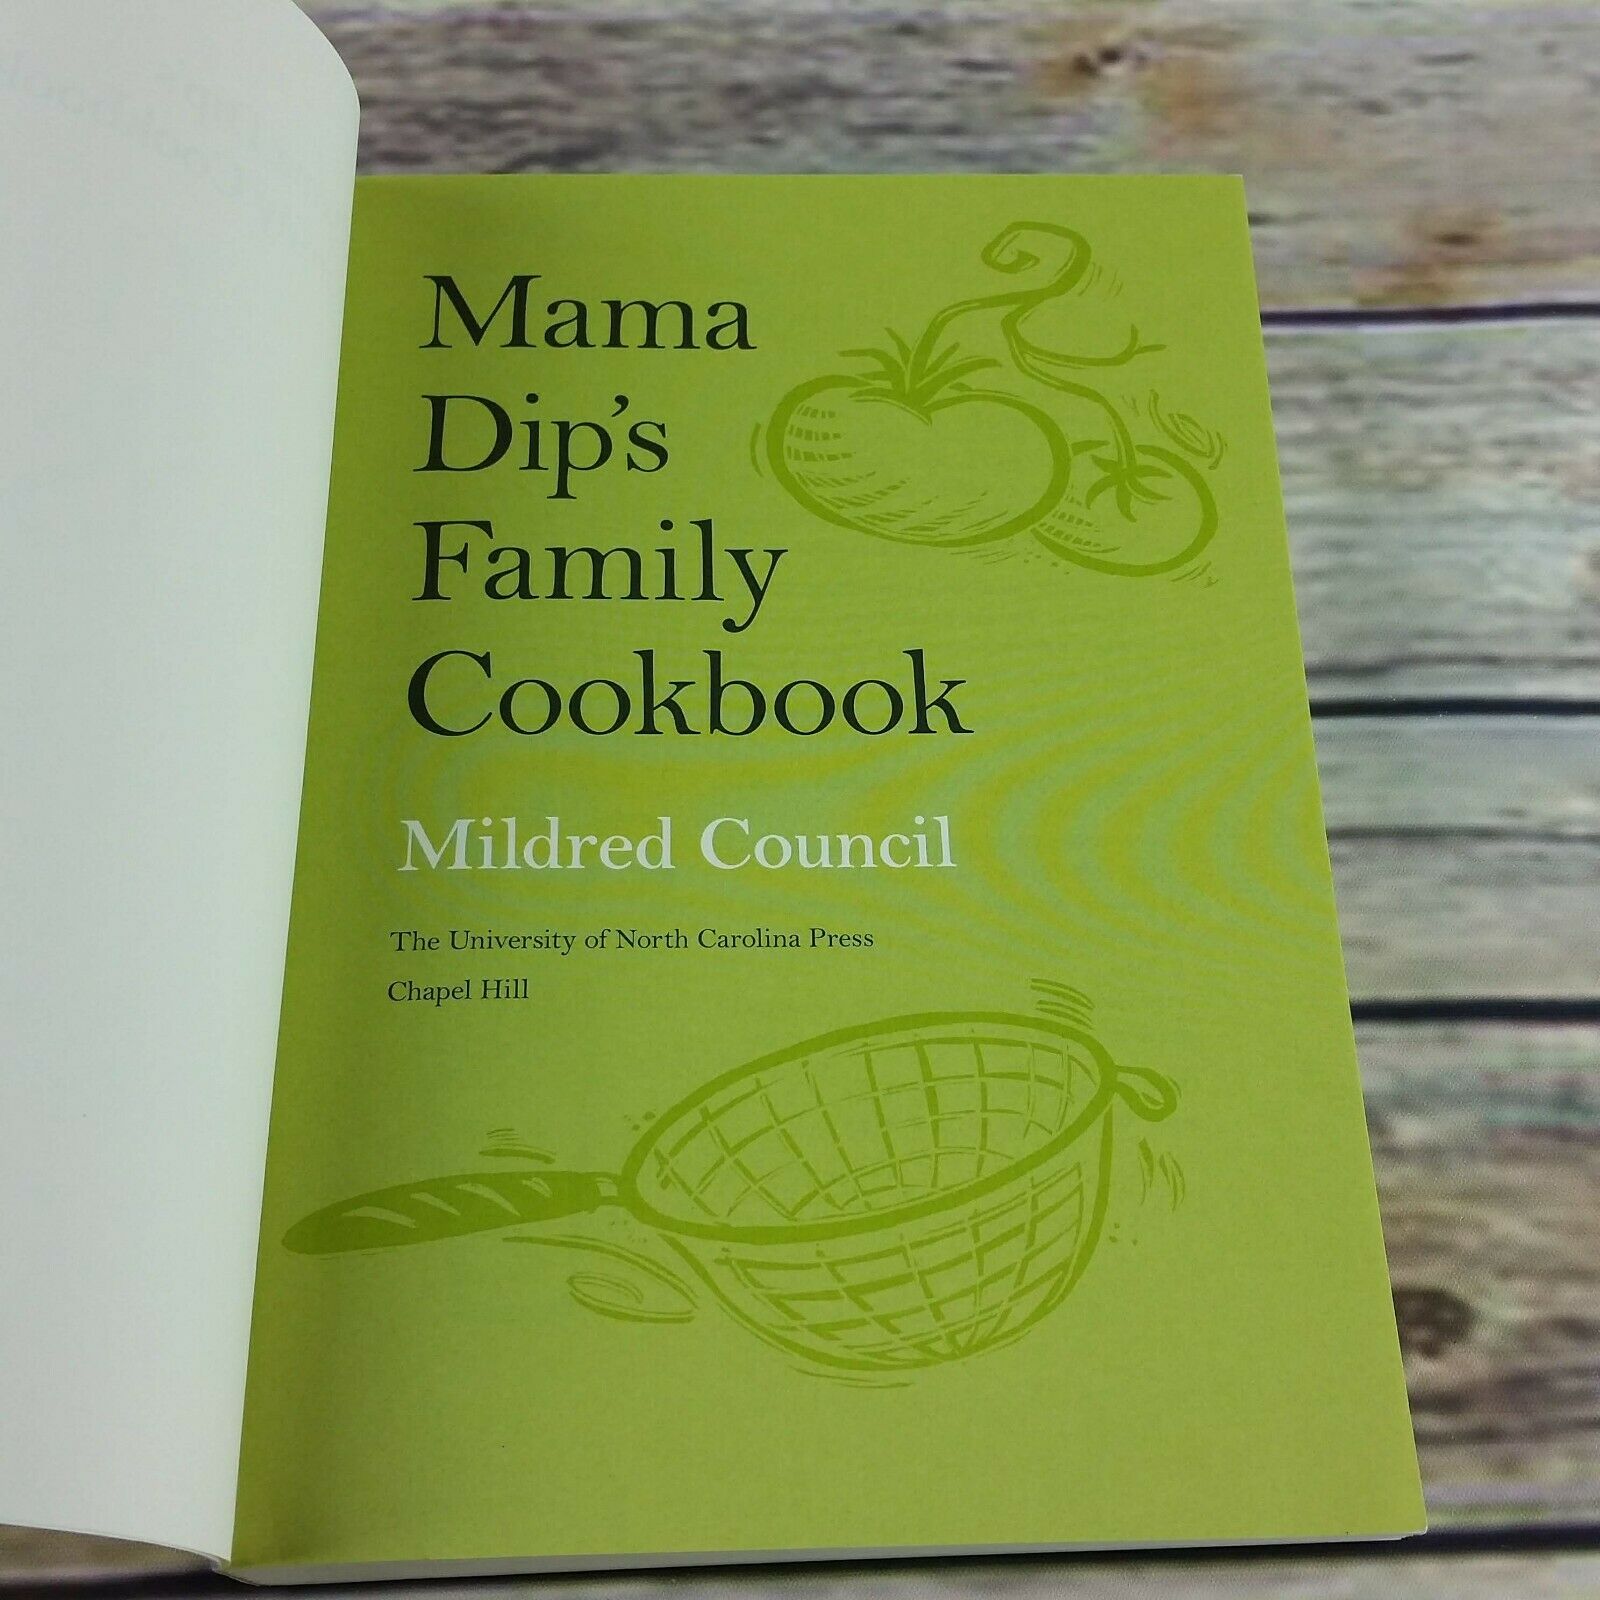 Mama Dip's Family Cookbook Mildred Council 2004 Paperback Follow Up Book - At Grandma's Table